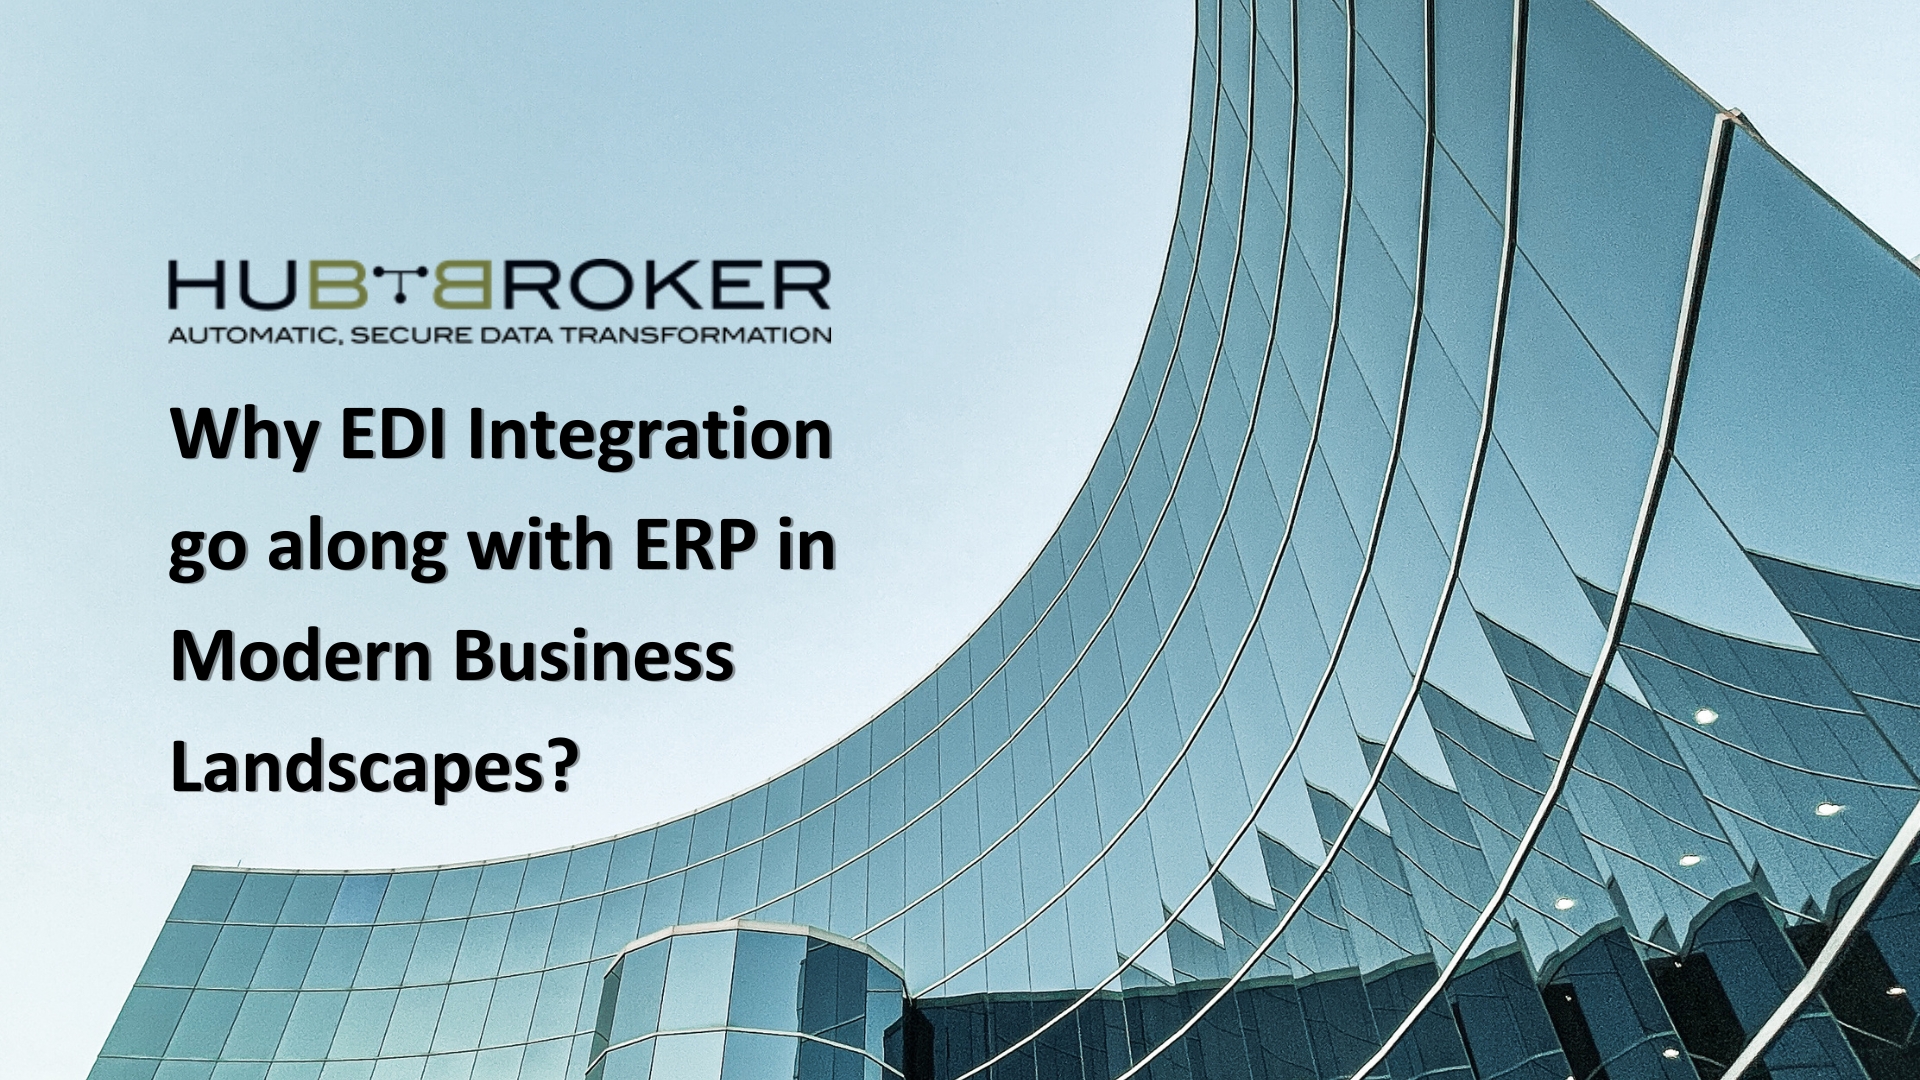 Why EDI Integration go along with ERP in Modern Business Landscapes?